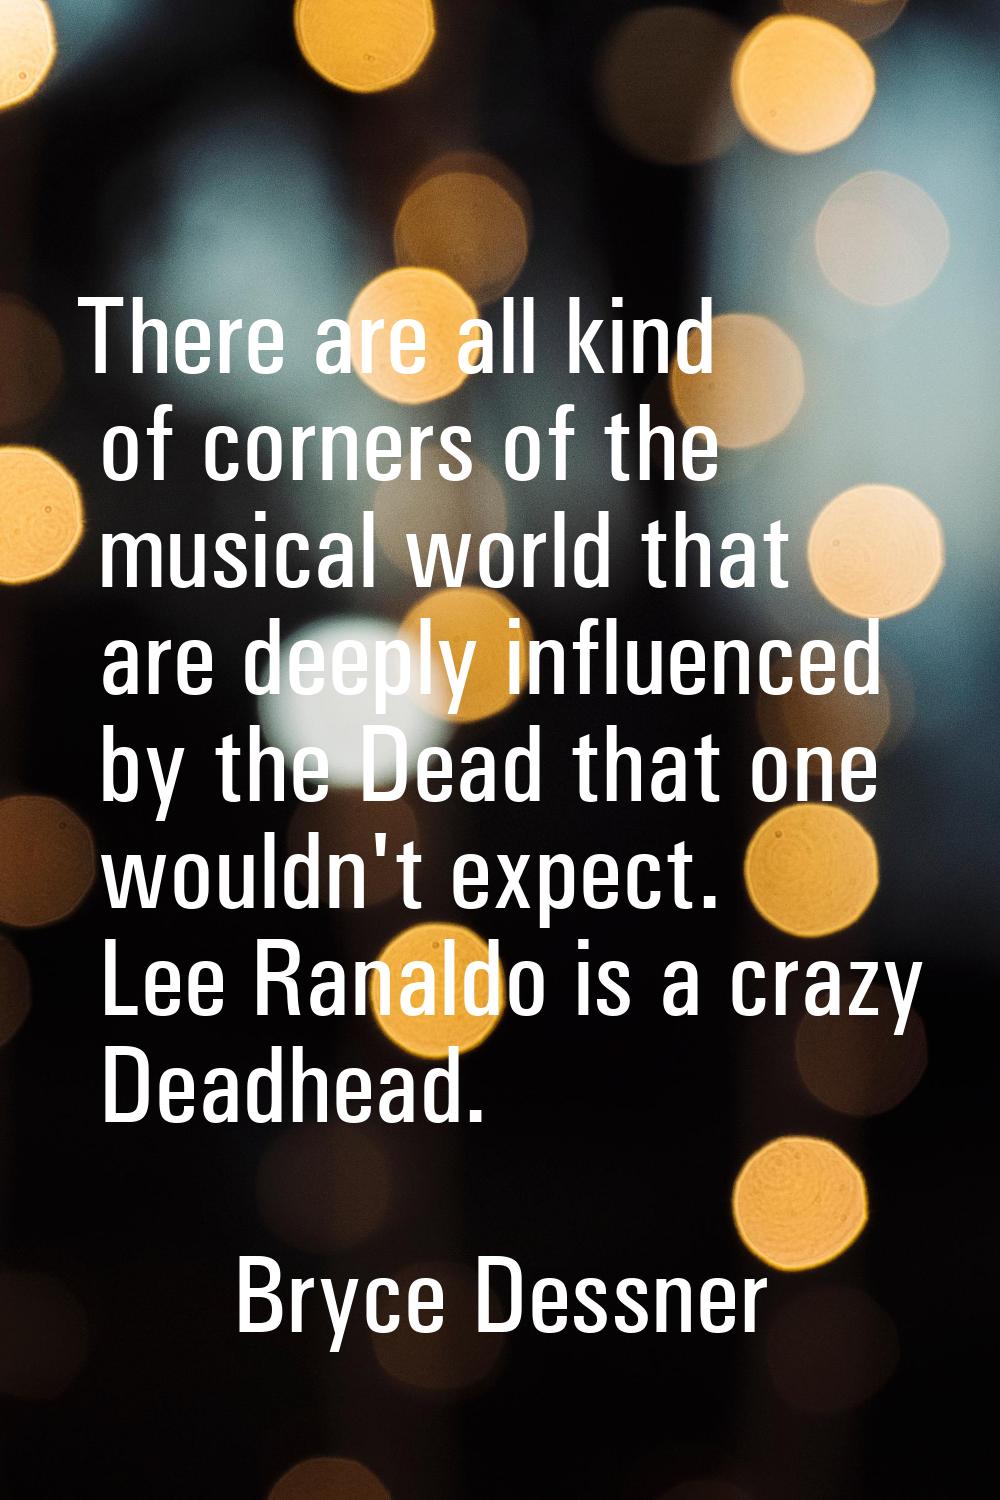 There are all kind of corners of the musical world that are deeply influenced by the Dead that one 